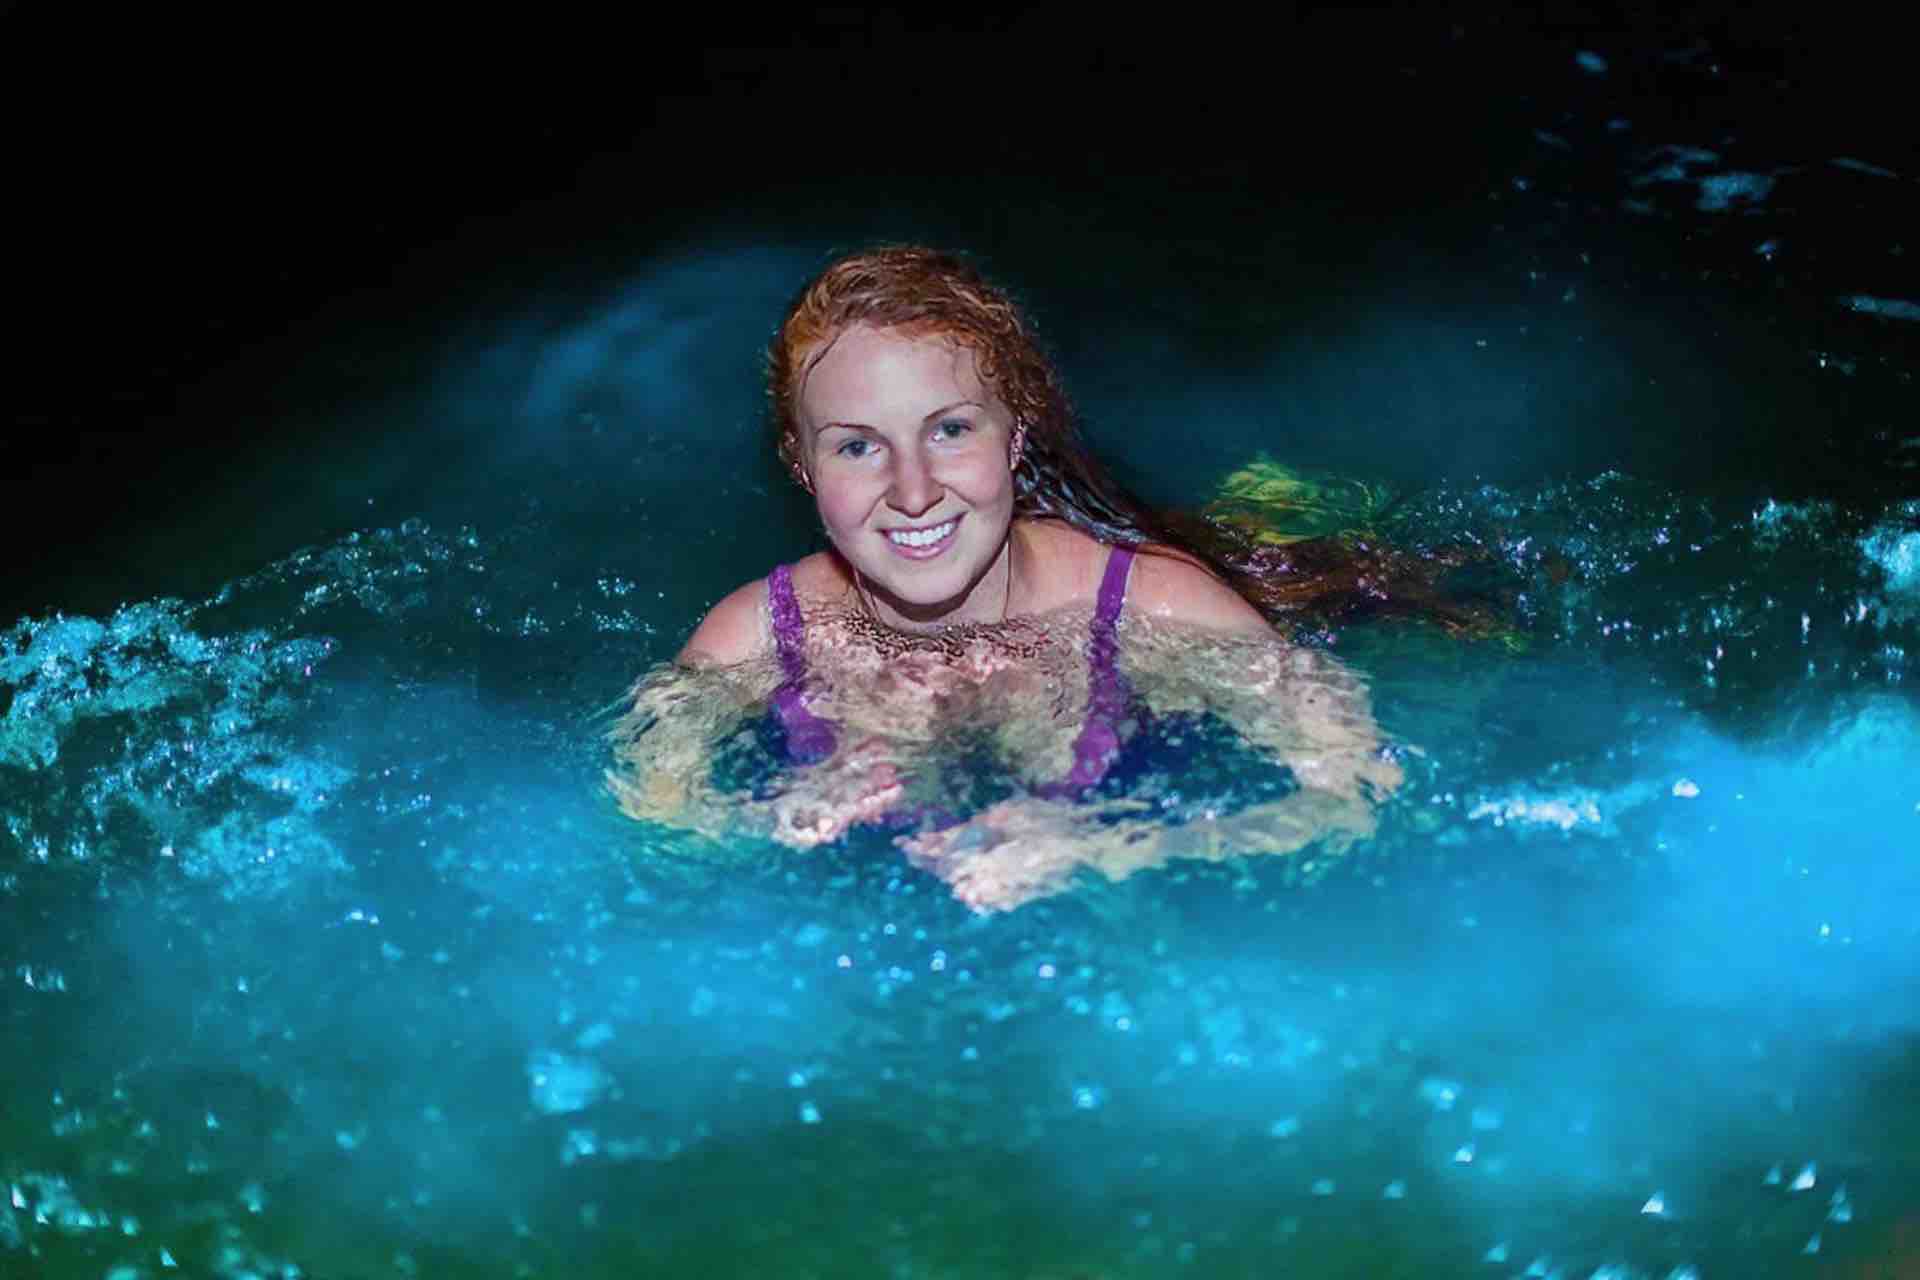 Bocas del Toro Bioluminescence tour guest in water